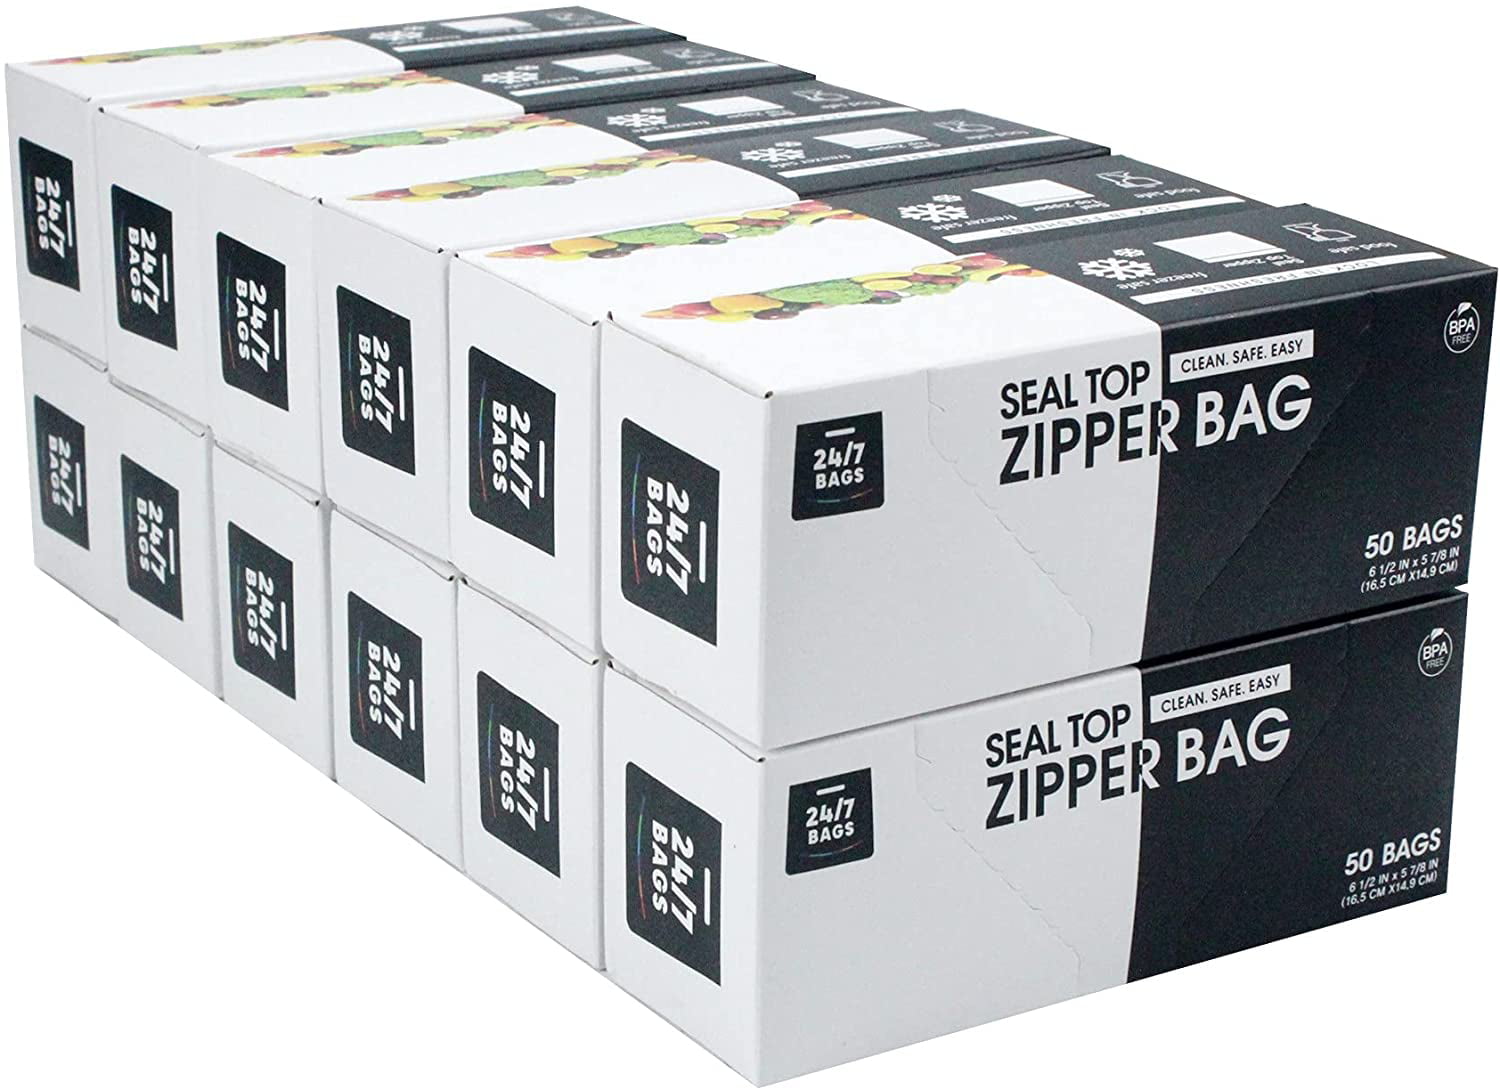  [PACK OF 72] Extra Large Food Storage Zipper Bags for Shipping,  Packaging, Storage, Moving & Relocating 2 Mil., 18x24, Spacious 5 Gallon  : Industrial & Scientific